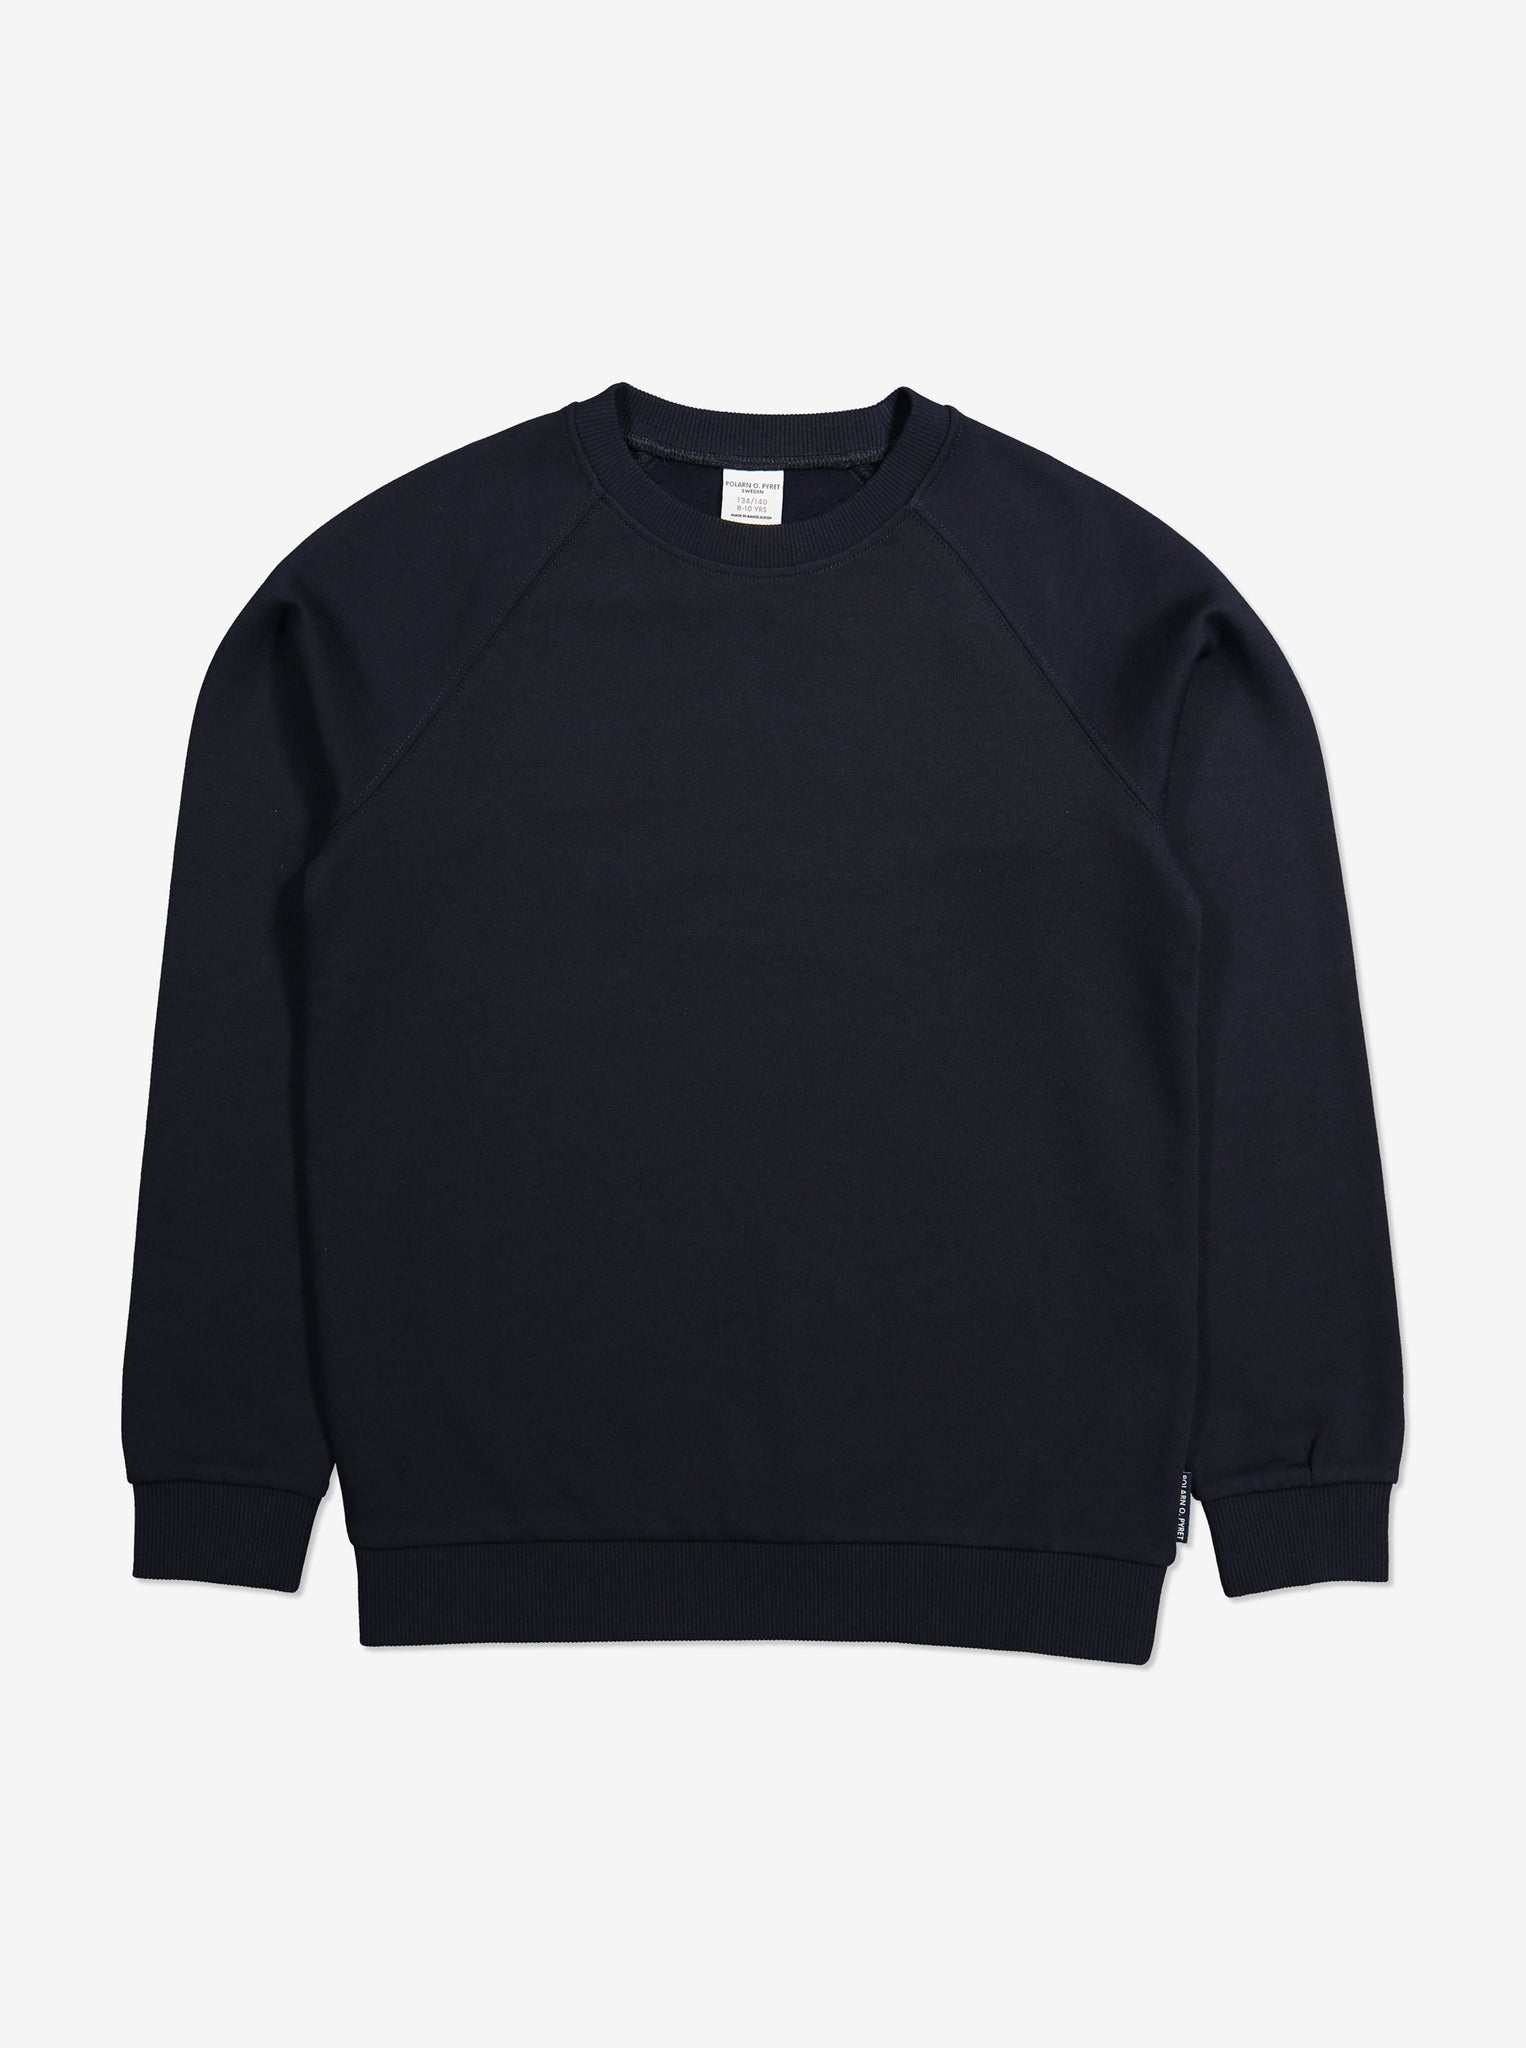 Navy Kids sweatshirt, sustainable organic cotton, durable and comfortable, polarn o. pyret quality